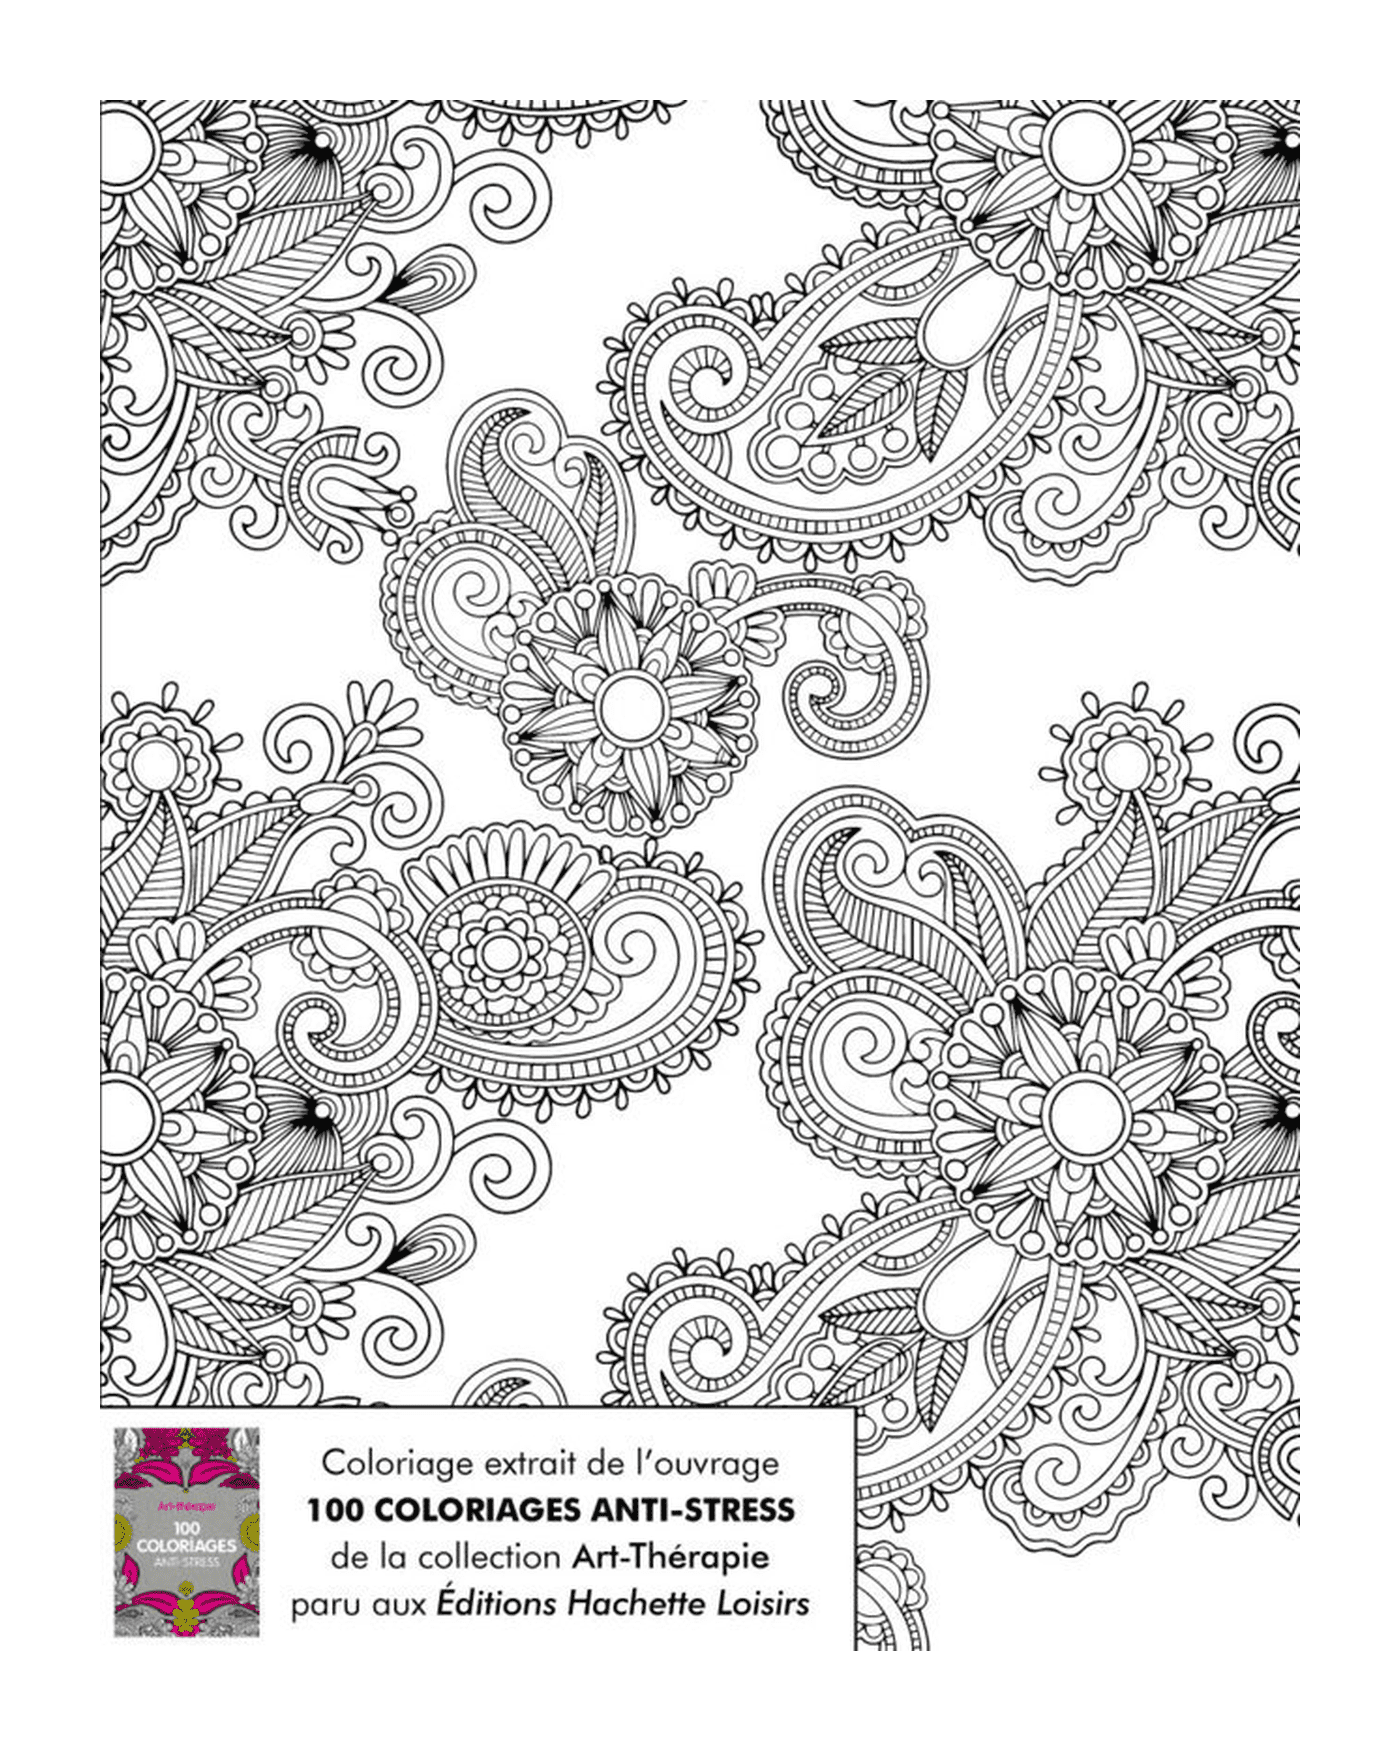  an image of a coloring book for adults 